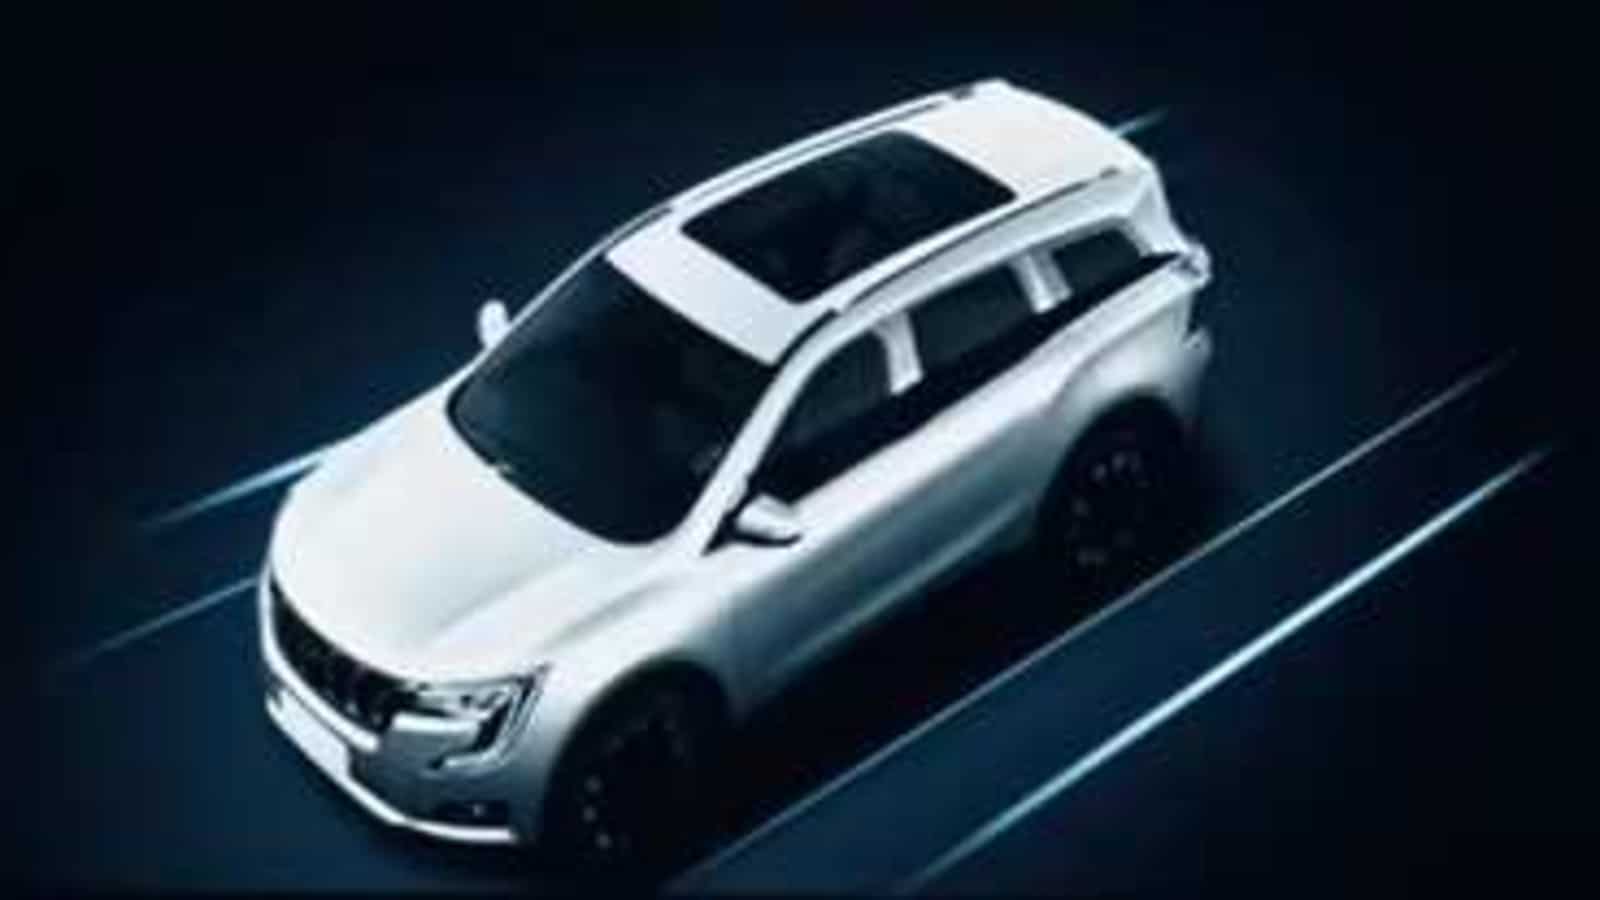 Mahindra XUV700 design, interiors, features revealed in new teaser. Watch video